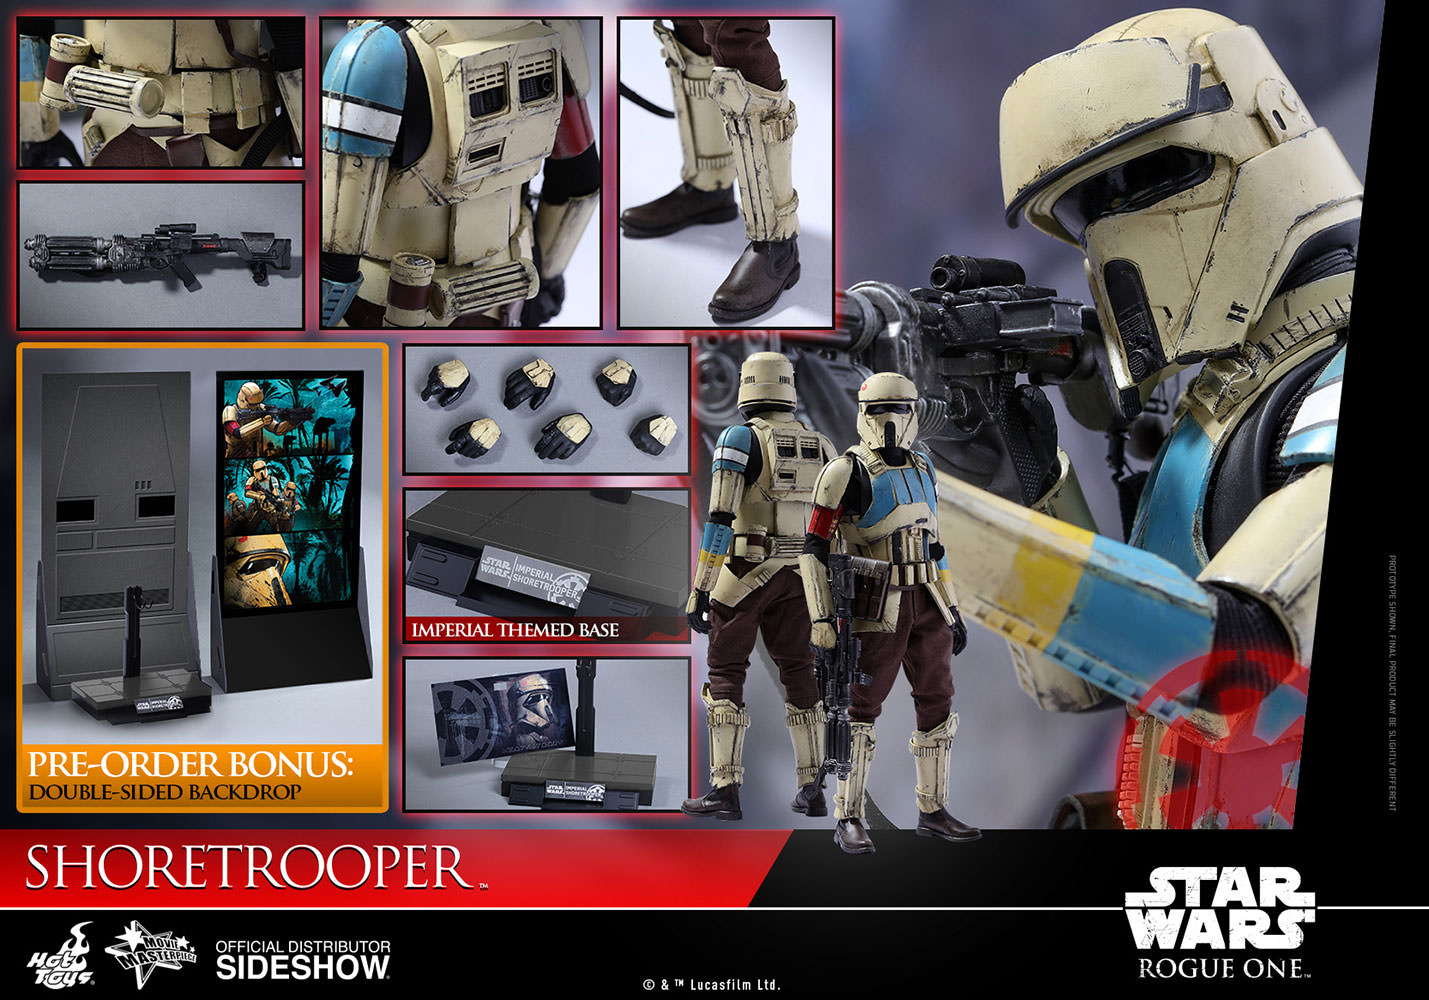 star-wars-rogue-one-shoretroopers-sixth-scale-hot-toys-902862-17.jpg